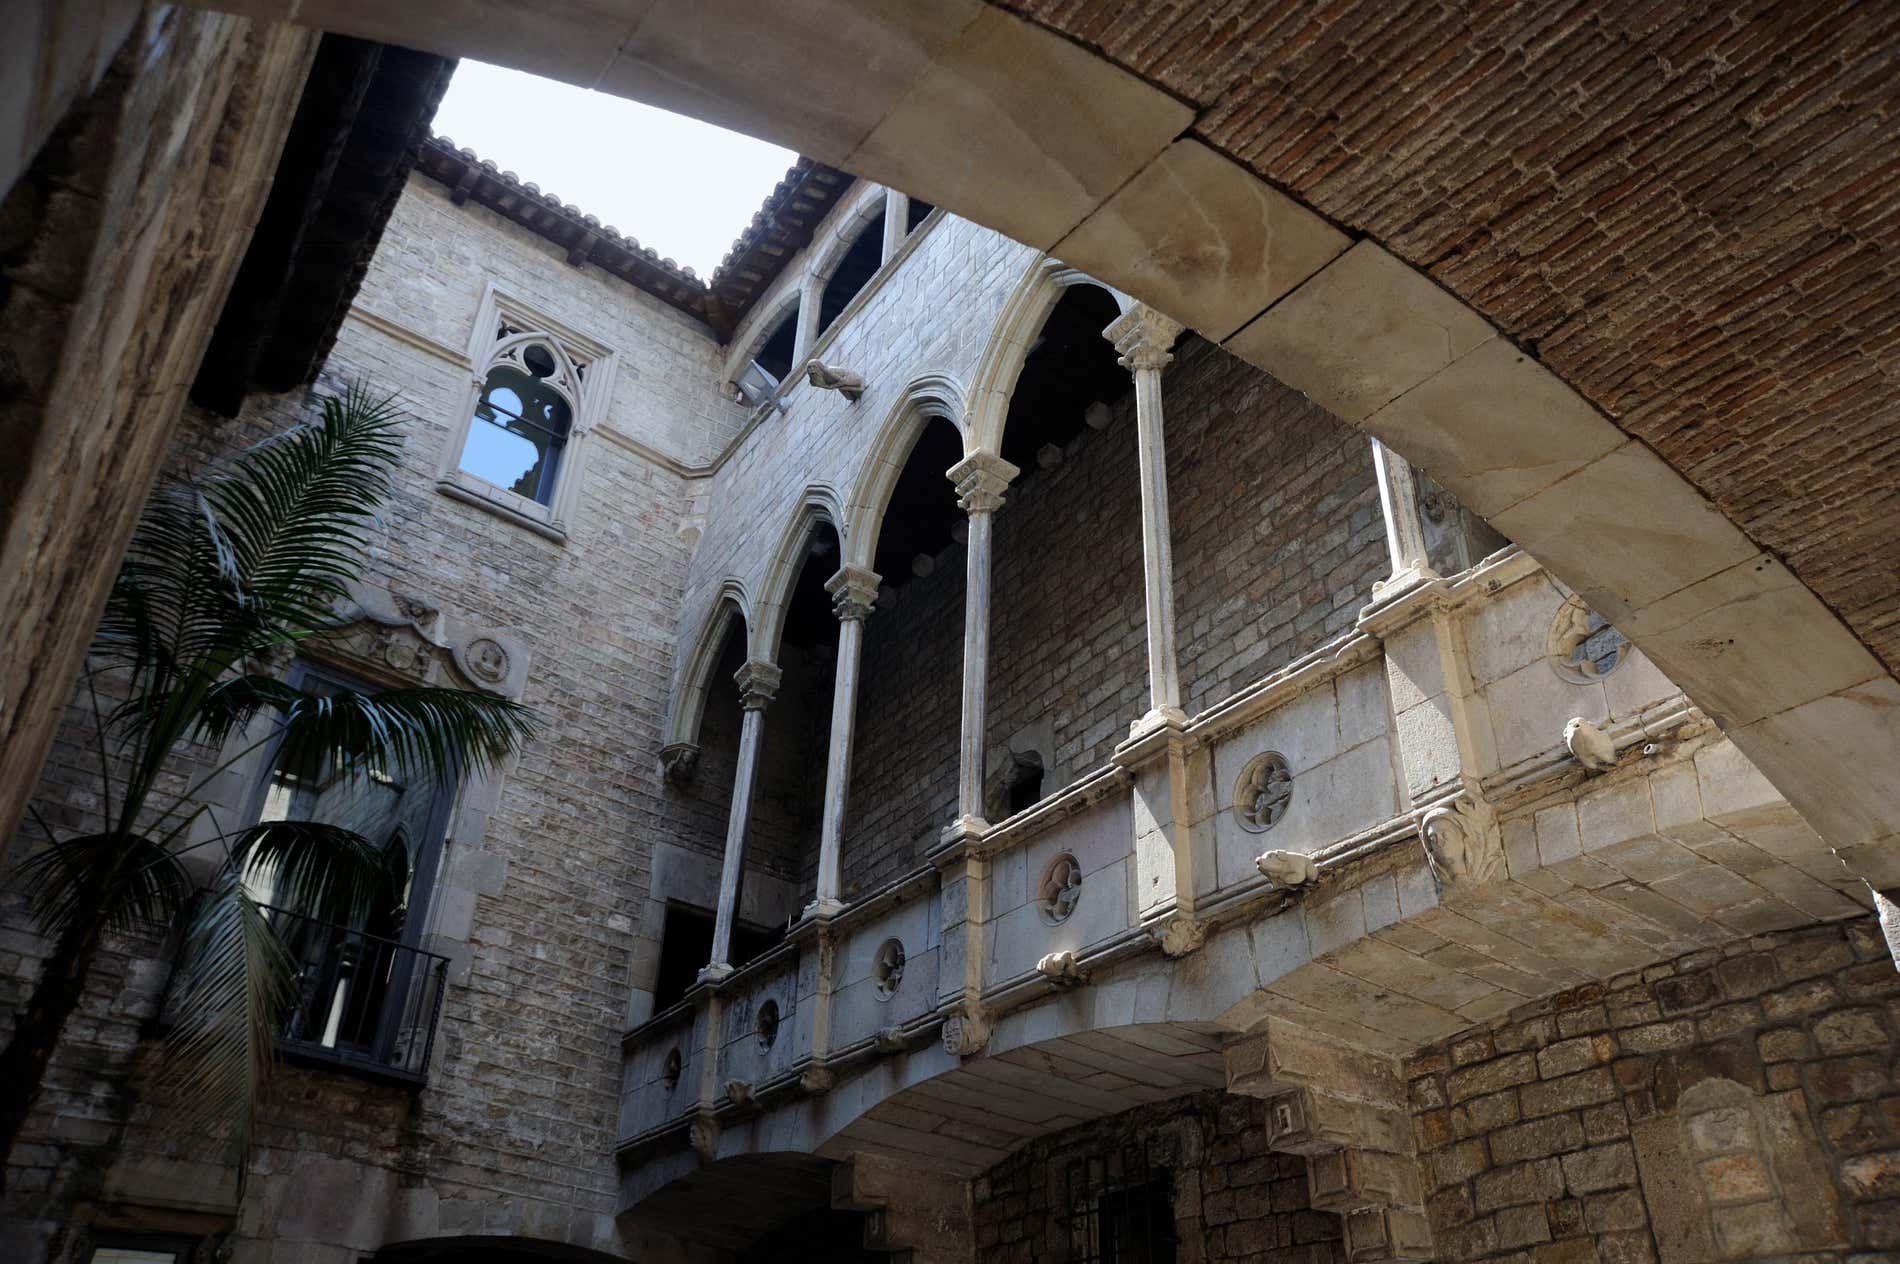 The cloister in the Picasso Museum of Barcelona